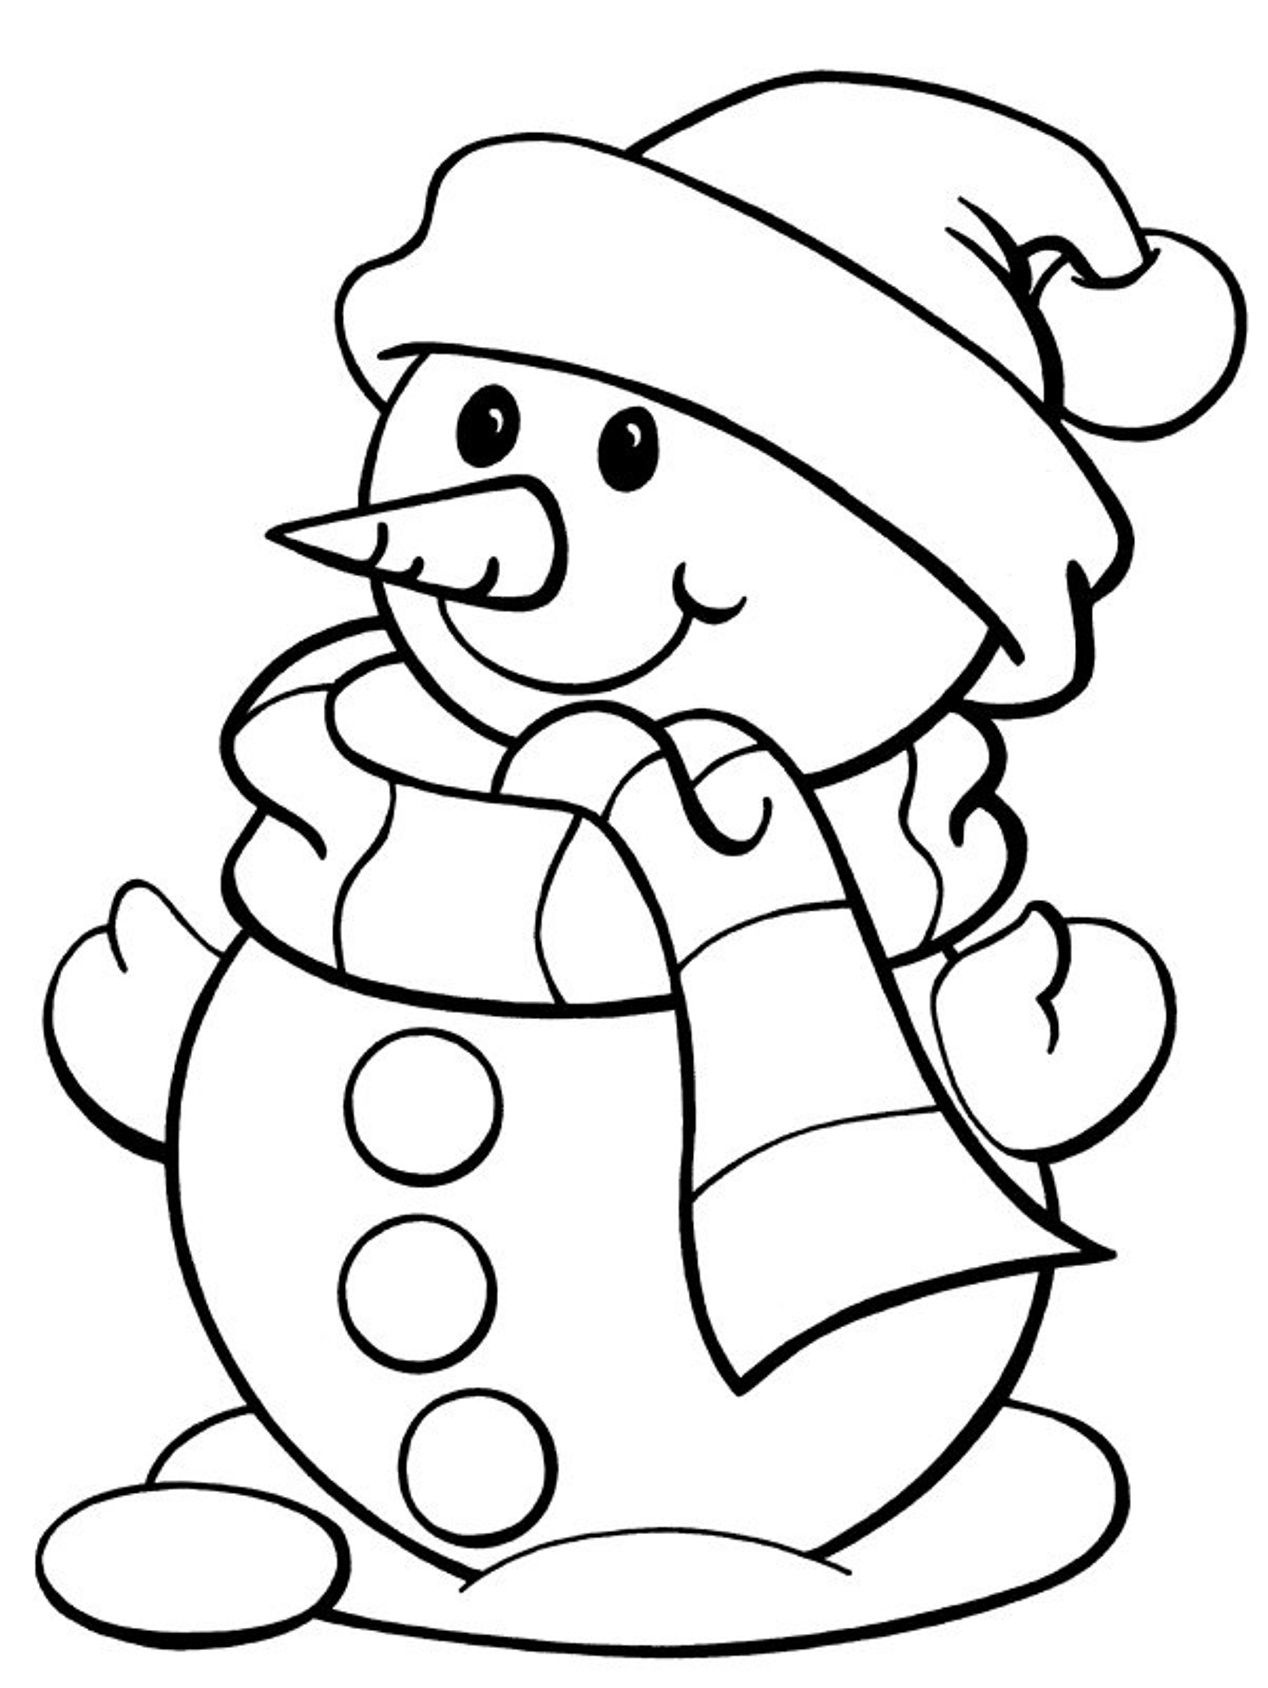 Free Winter Coloring Pages | Coloring Page | Kleurplaten - Christmas - Free Printable Winter Coloring Pages